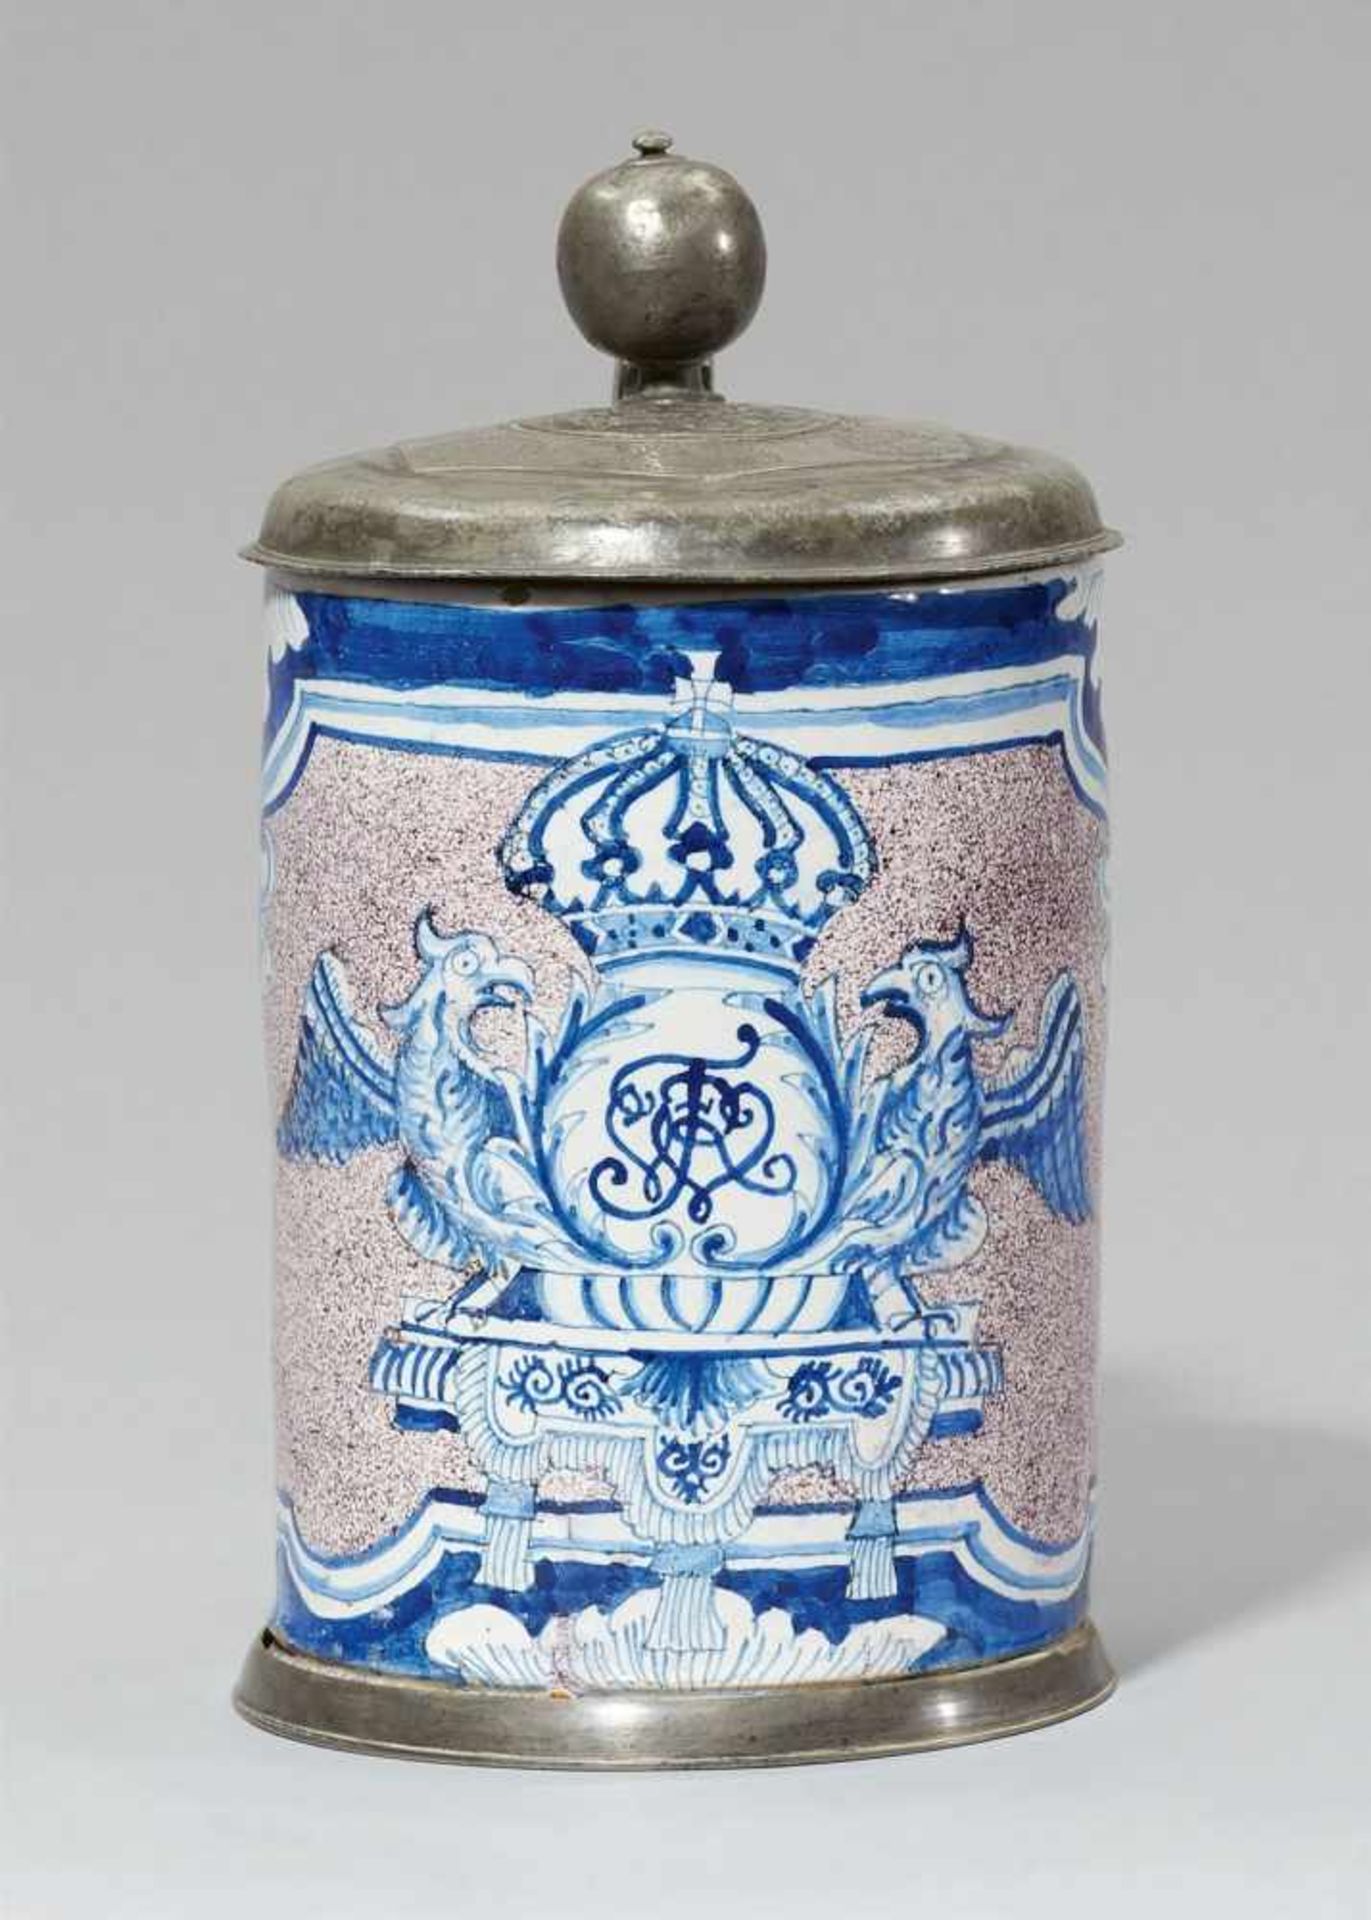 A Berlin faience tankard with the royal monogramDecorated with a large foliate cartouche with the